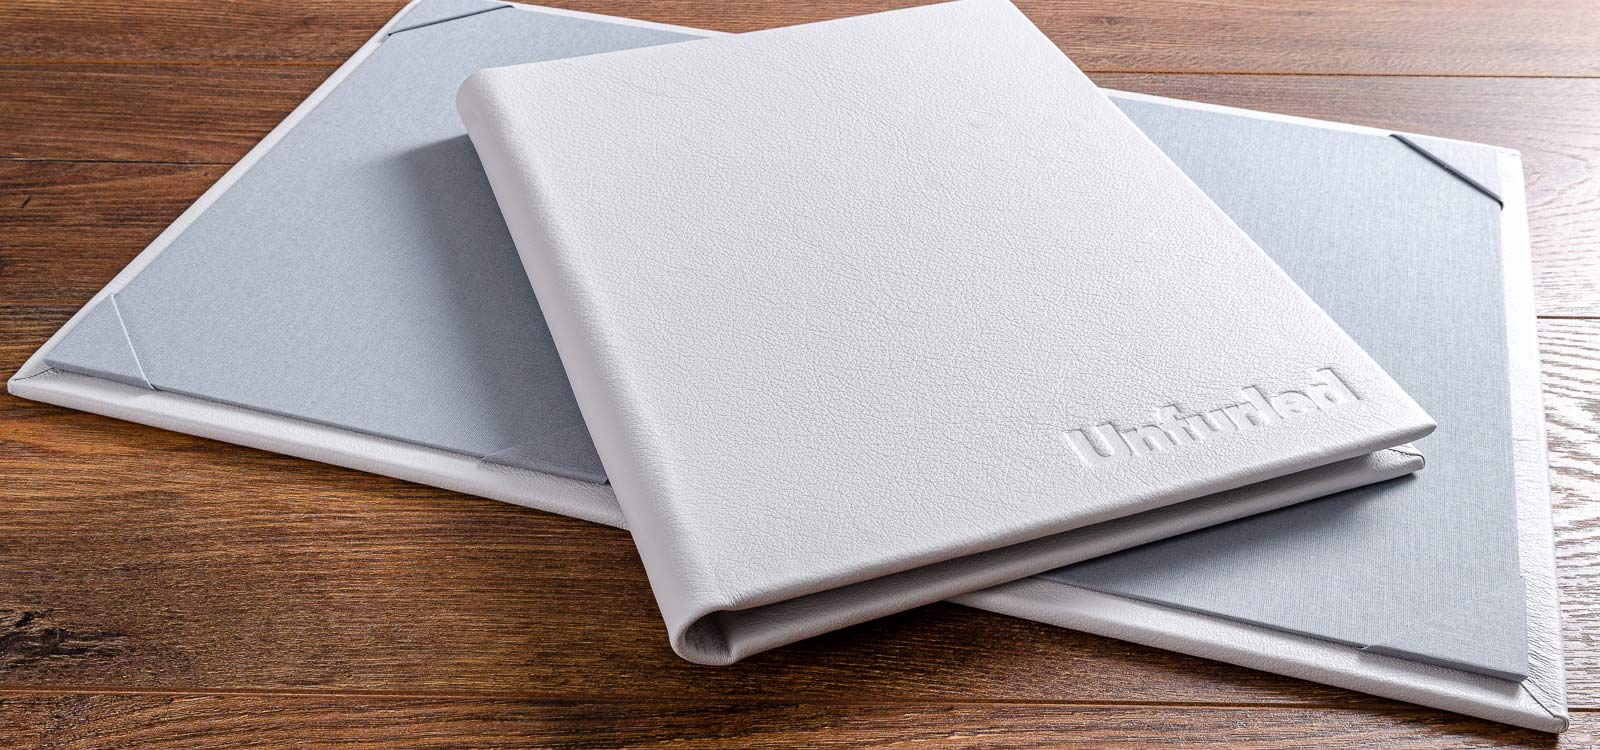 custom made menus in white leather with personalised embossing for luxury yacht